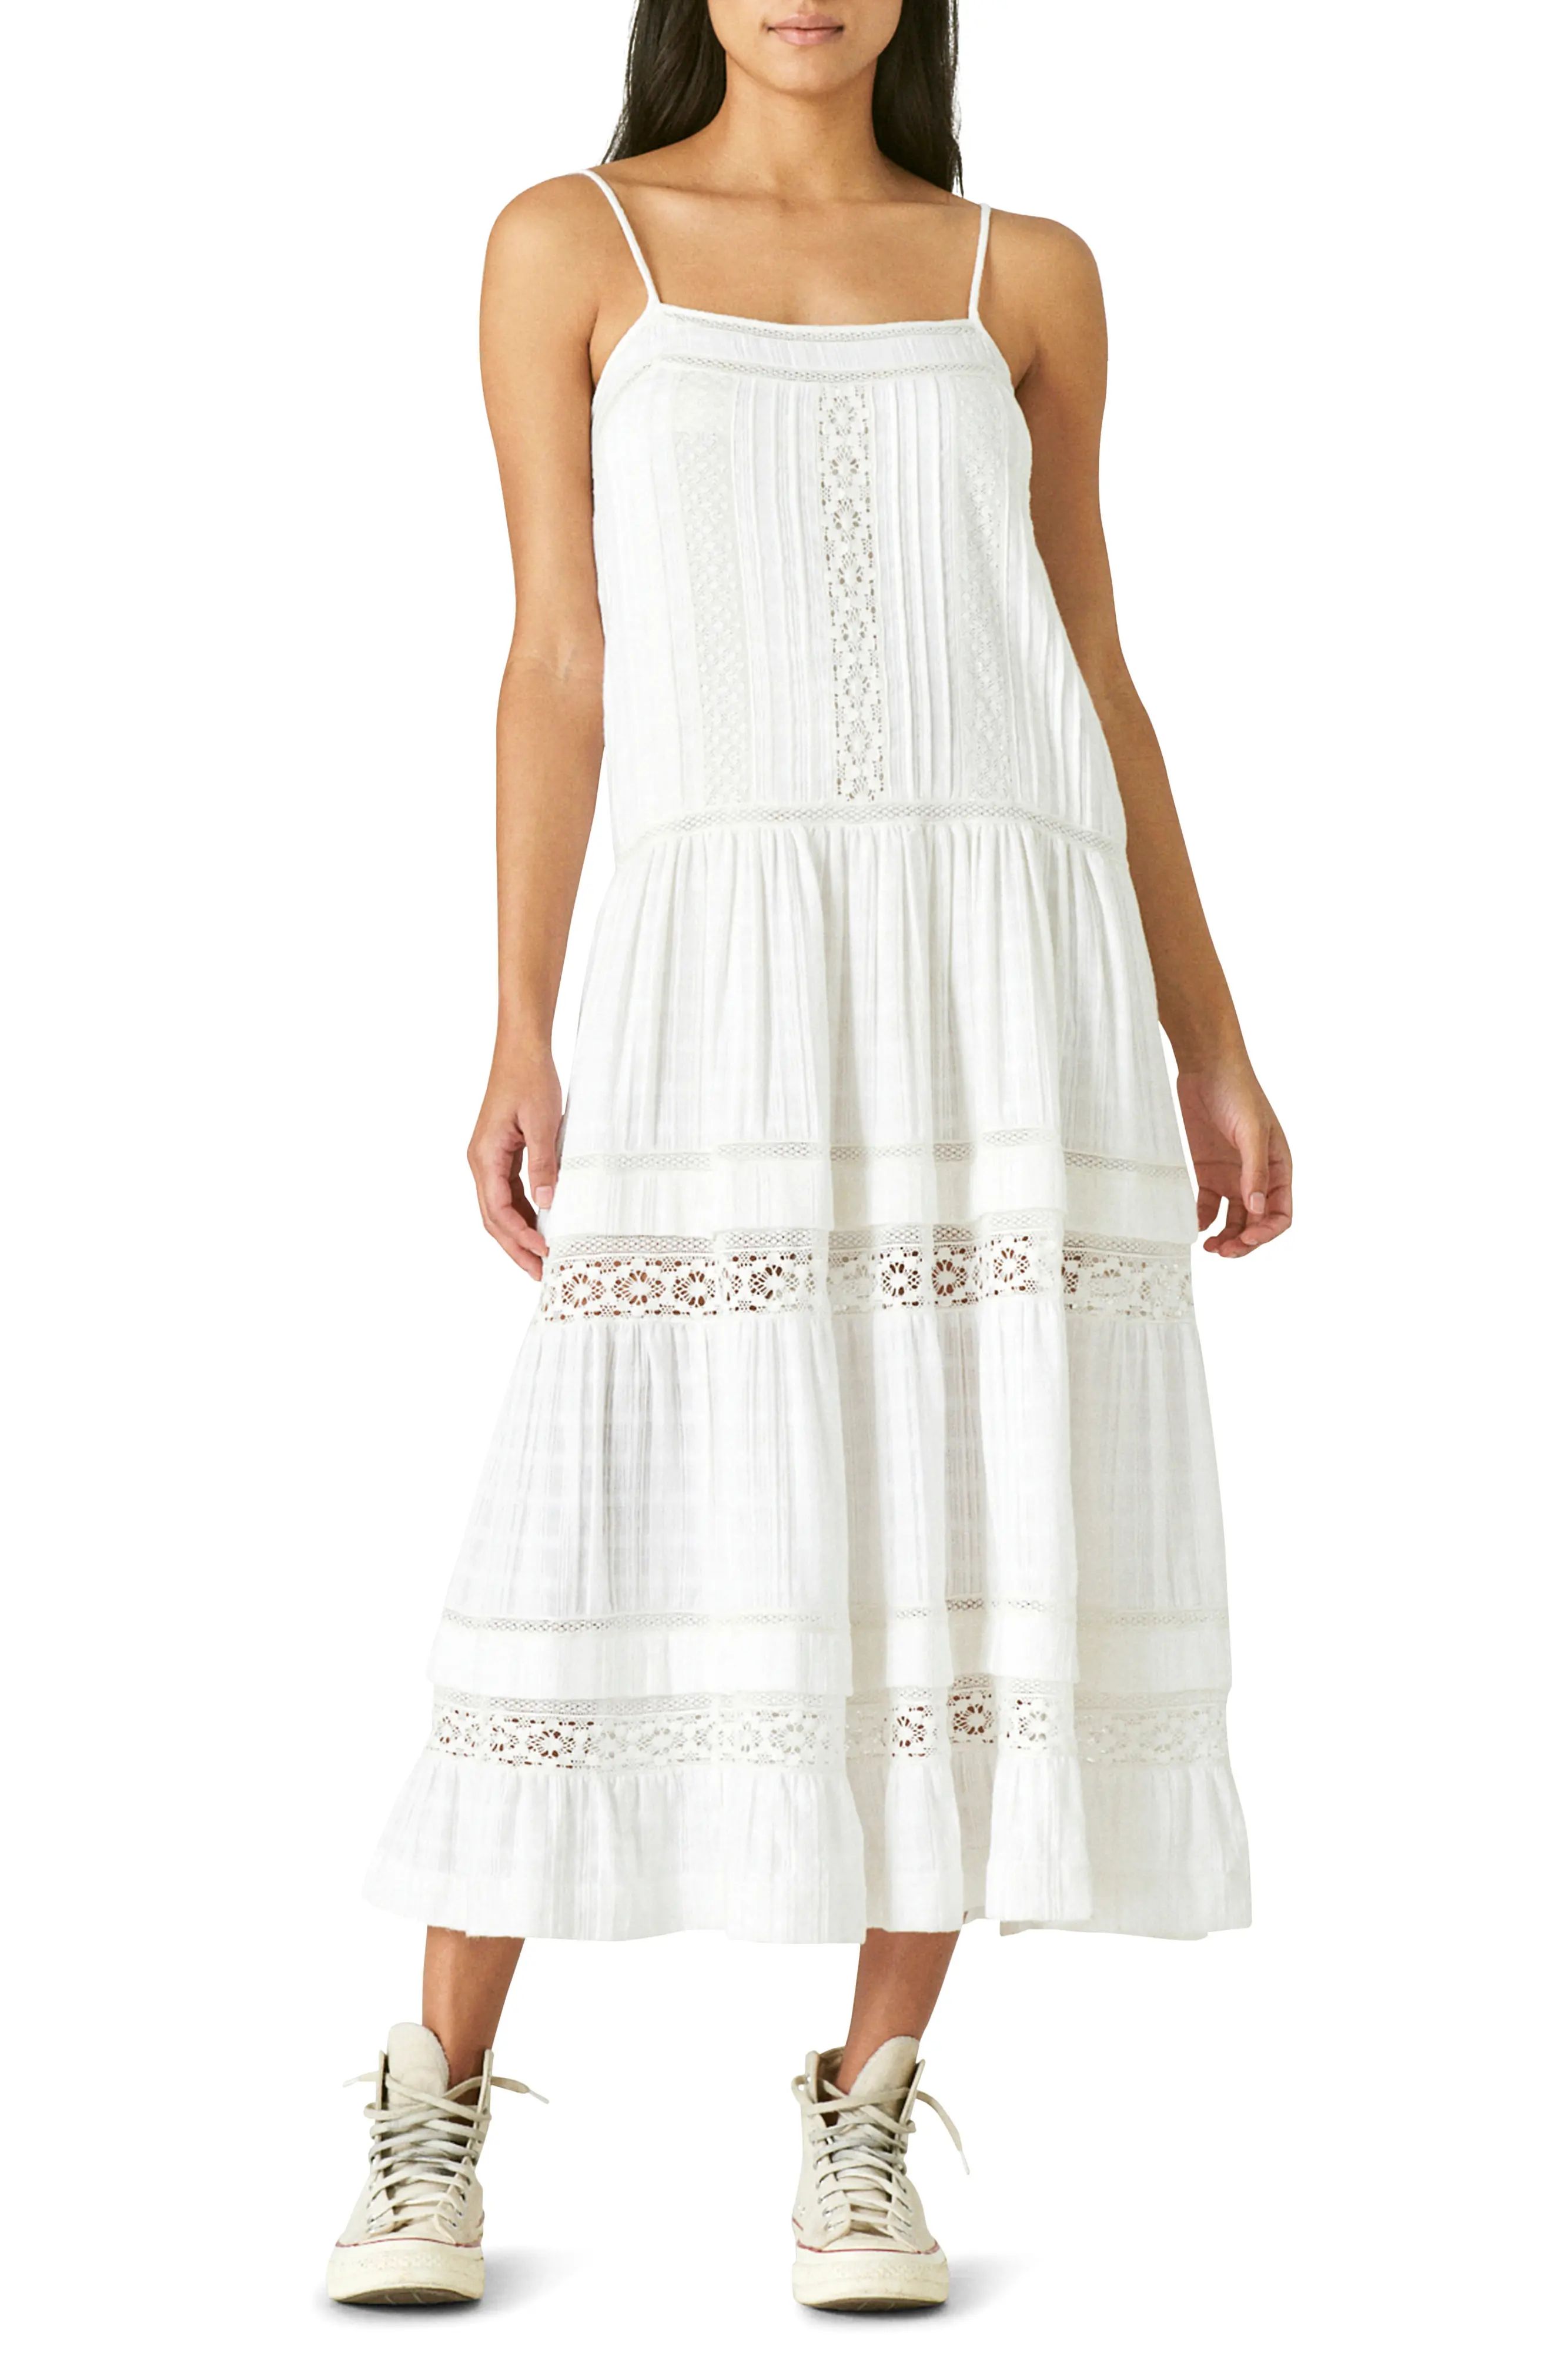 Lucky Brand Lace Sleeveless Midi Dress in White at Nordstrom, Size Small | Nordstrom